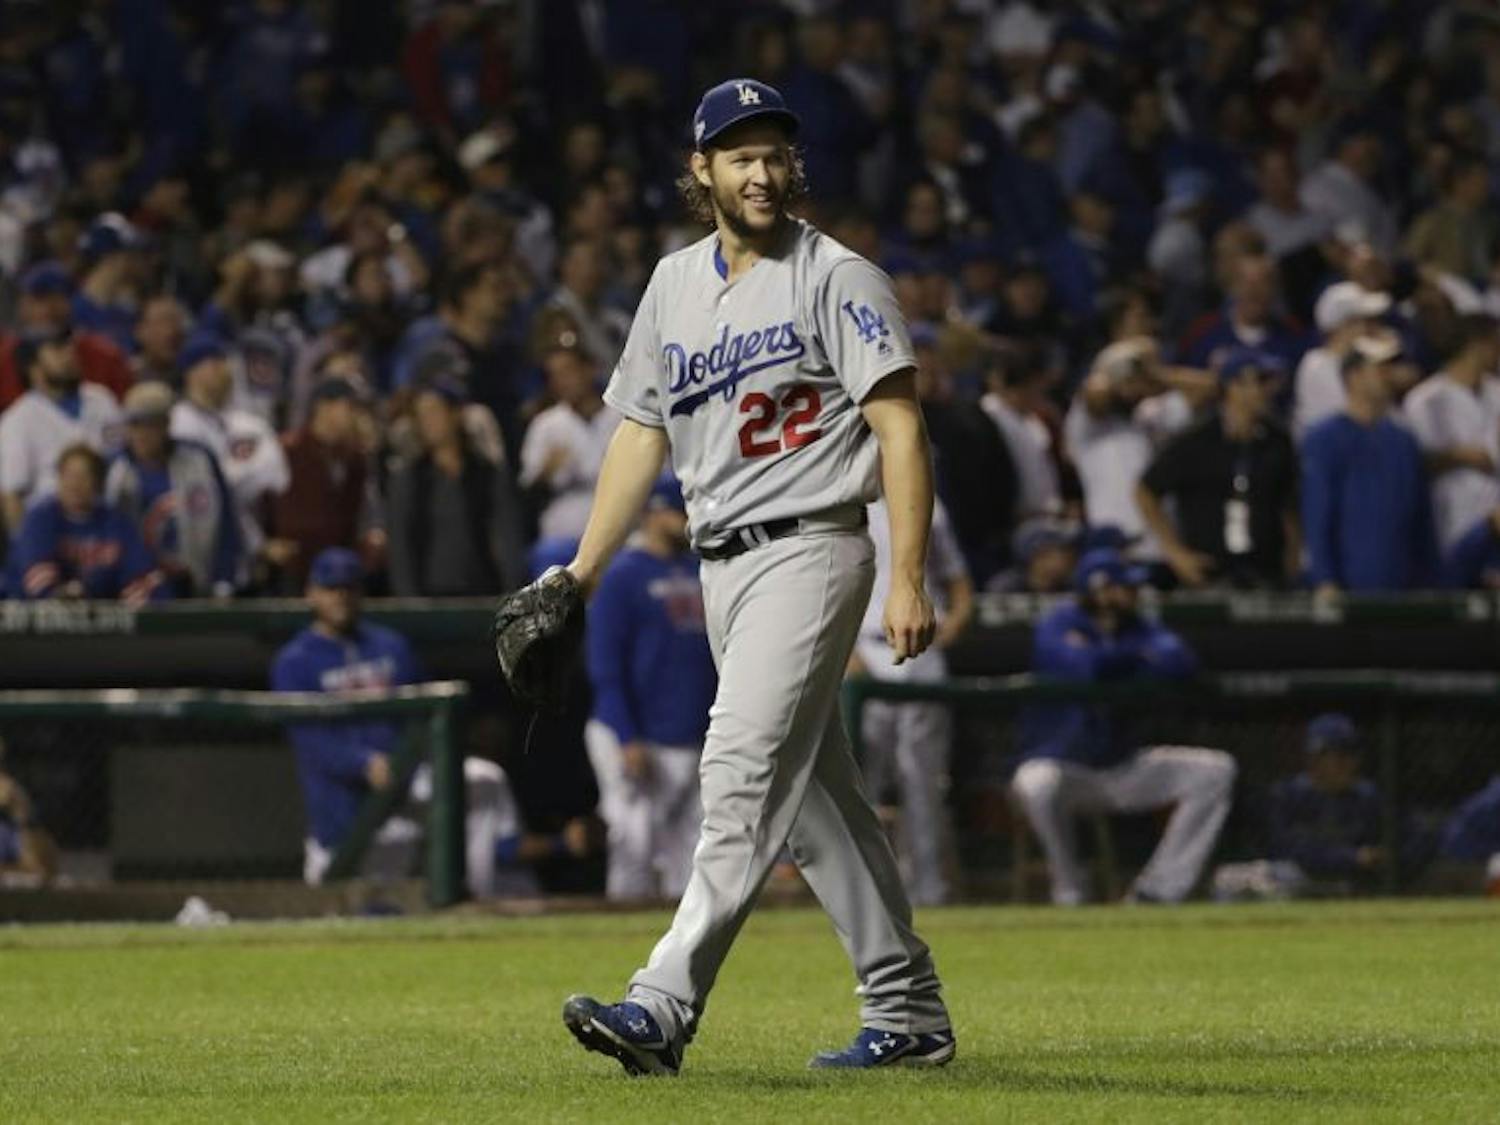 Dodgers ace Clayton Kershaw will help lead the Dodgers on a deep postseason run this fall.